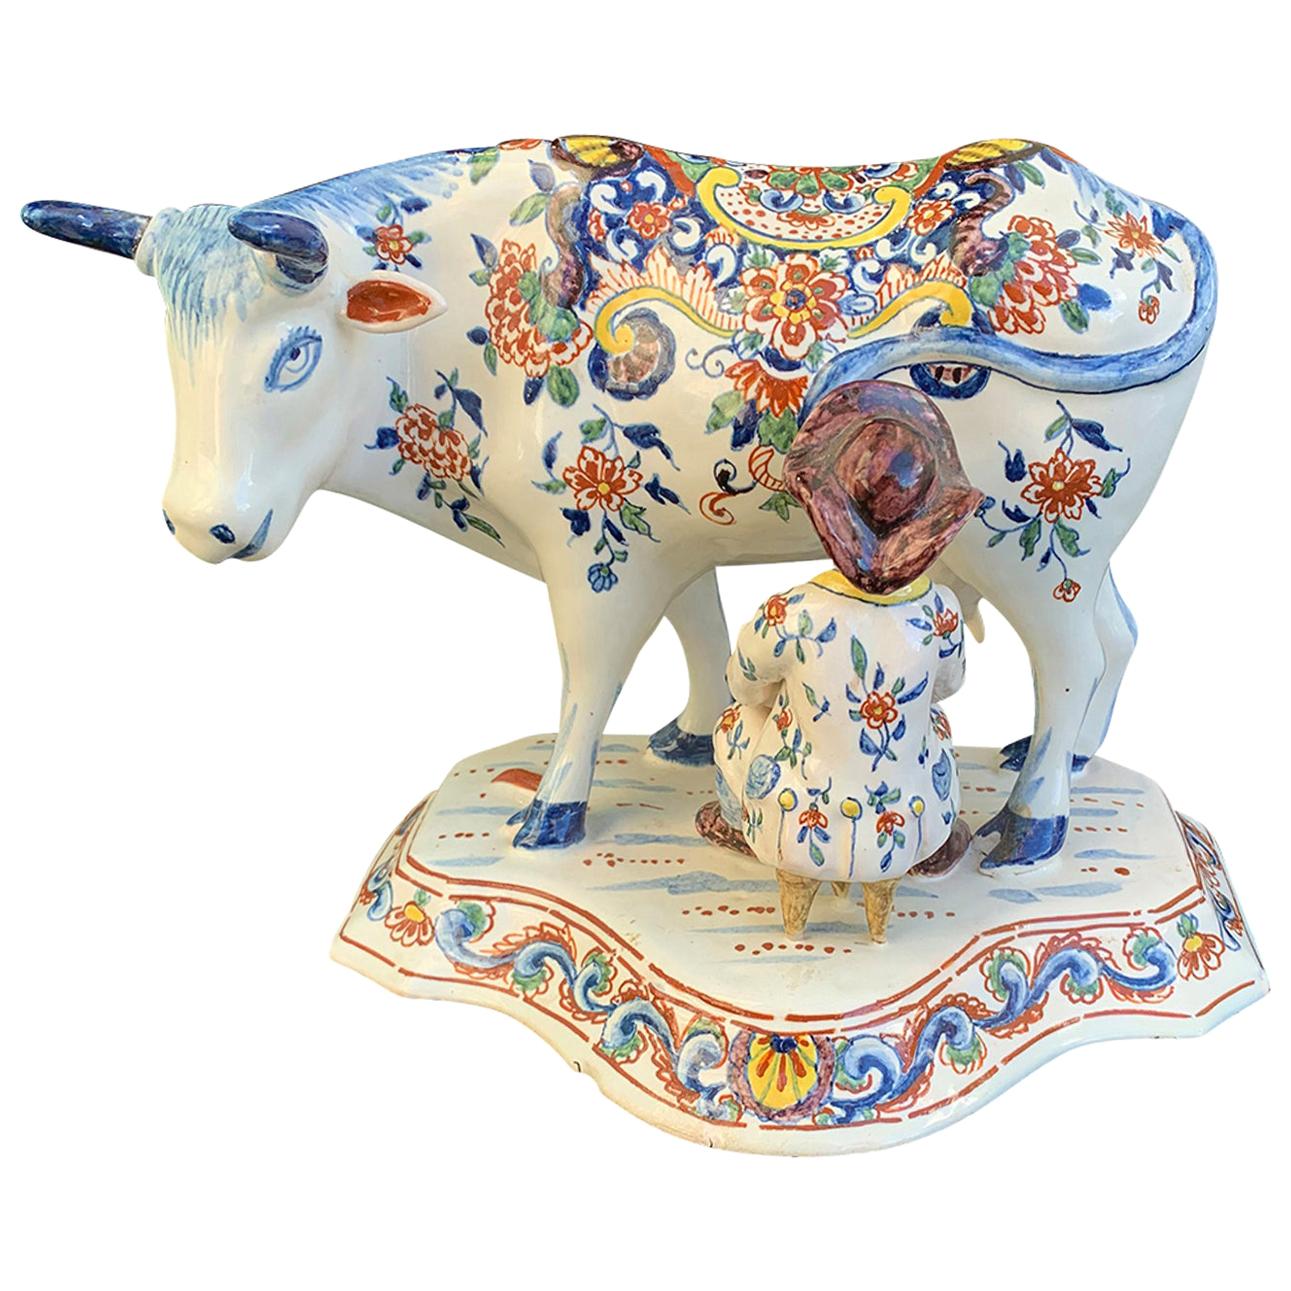 Late 18th-Early 19th Century Dutch Delft Polychrome Porcelain Cow Milking Group